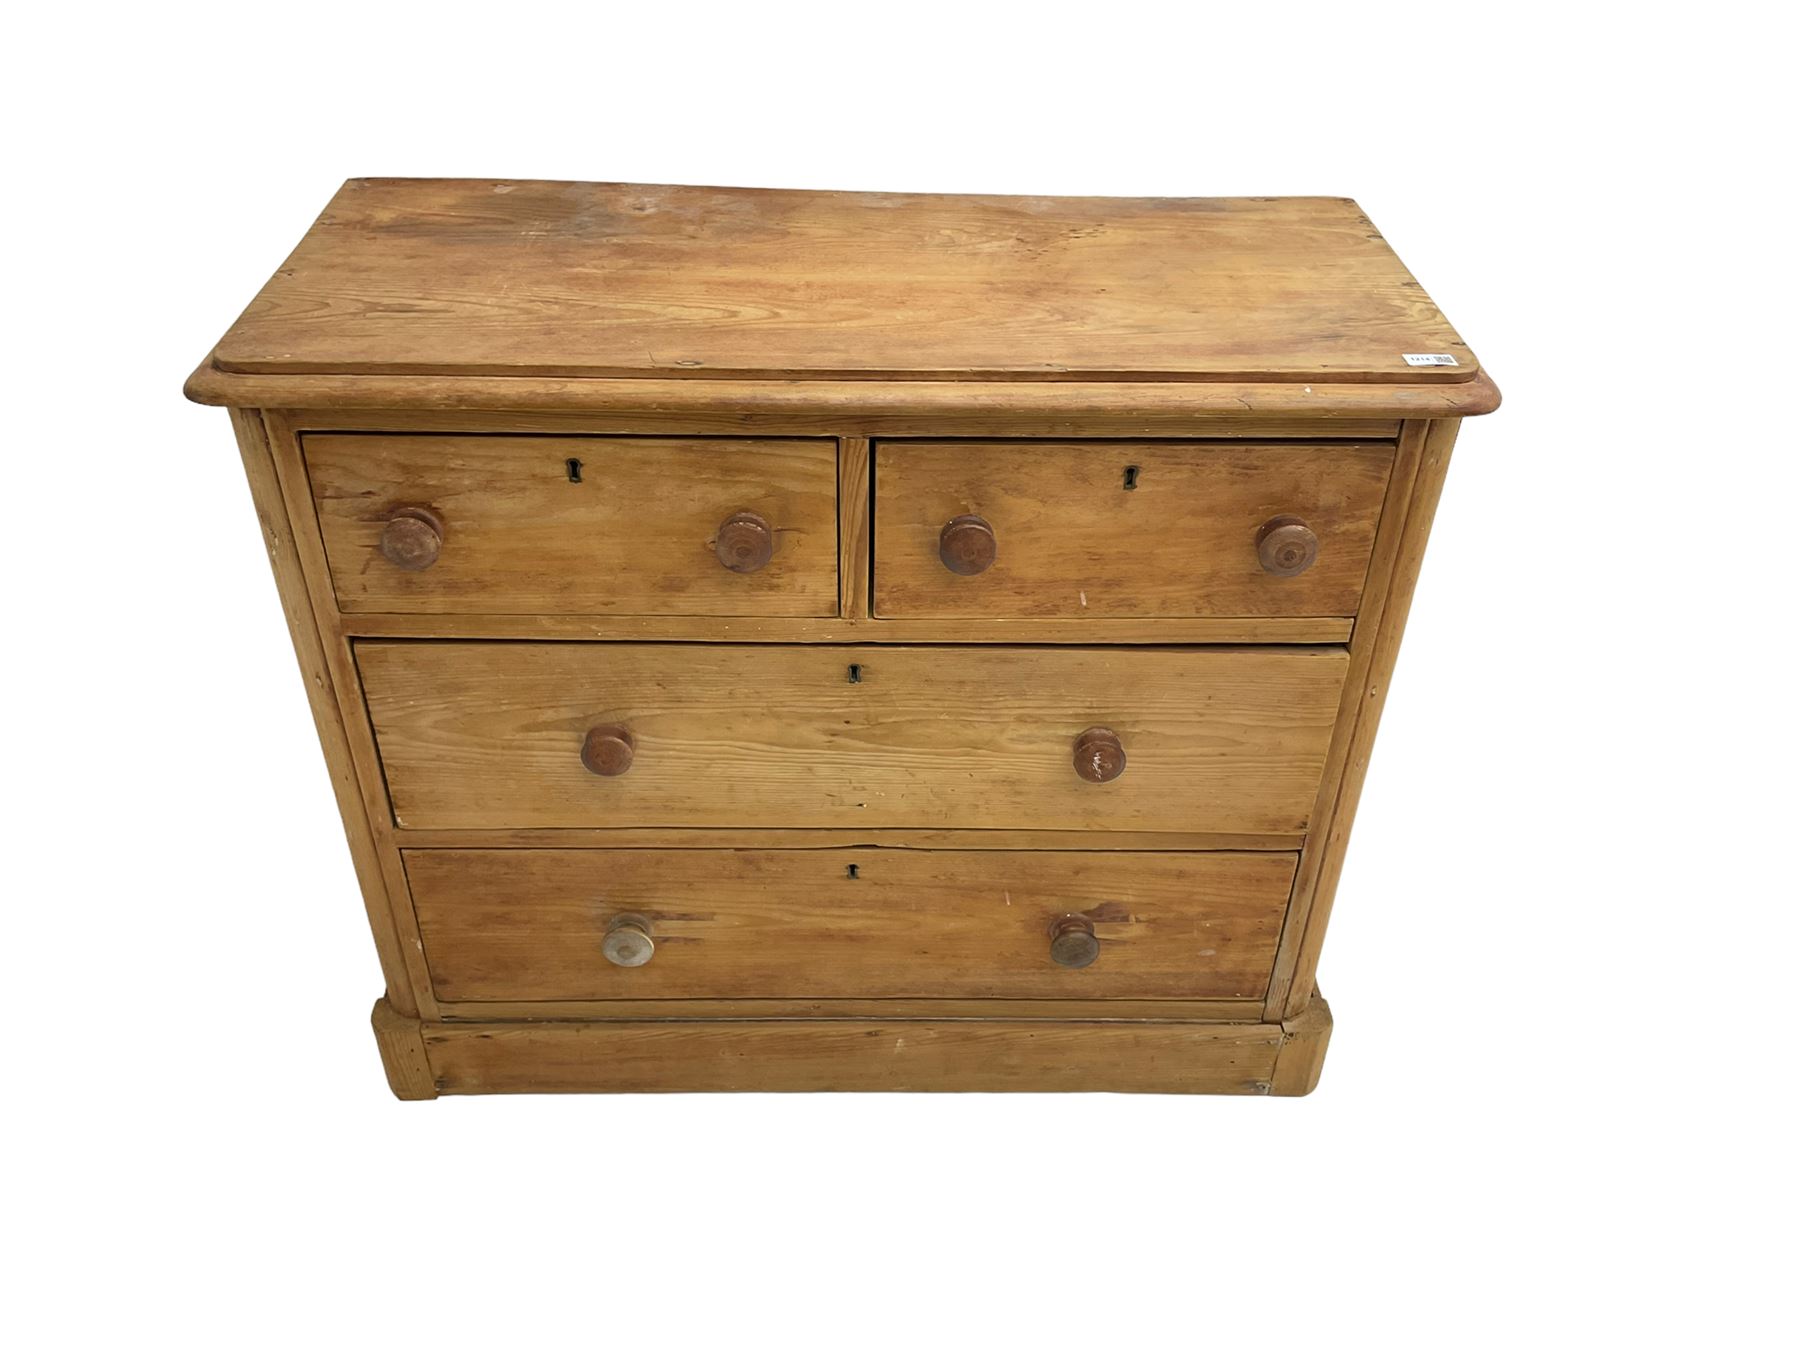 Late 19th century pine chest - Image 2 of 6